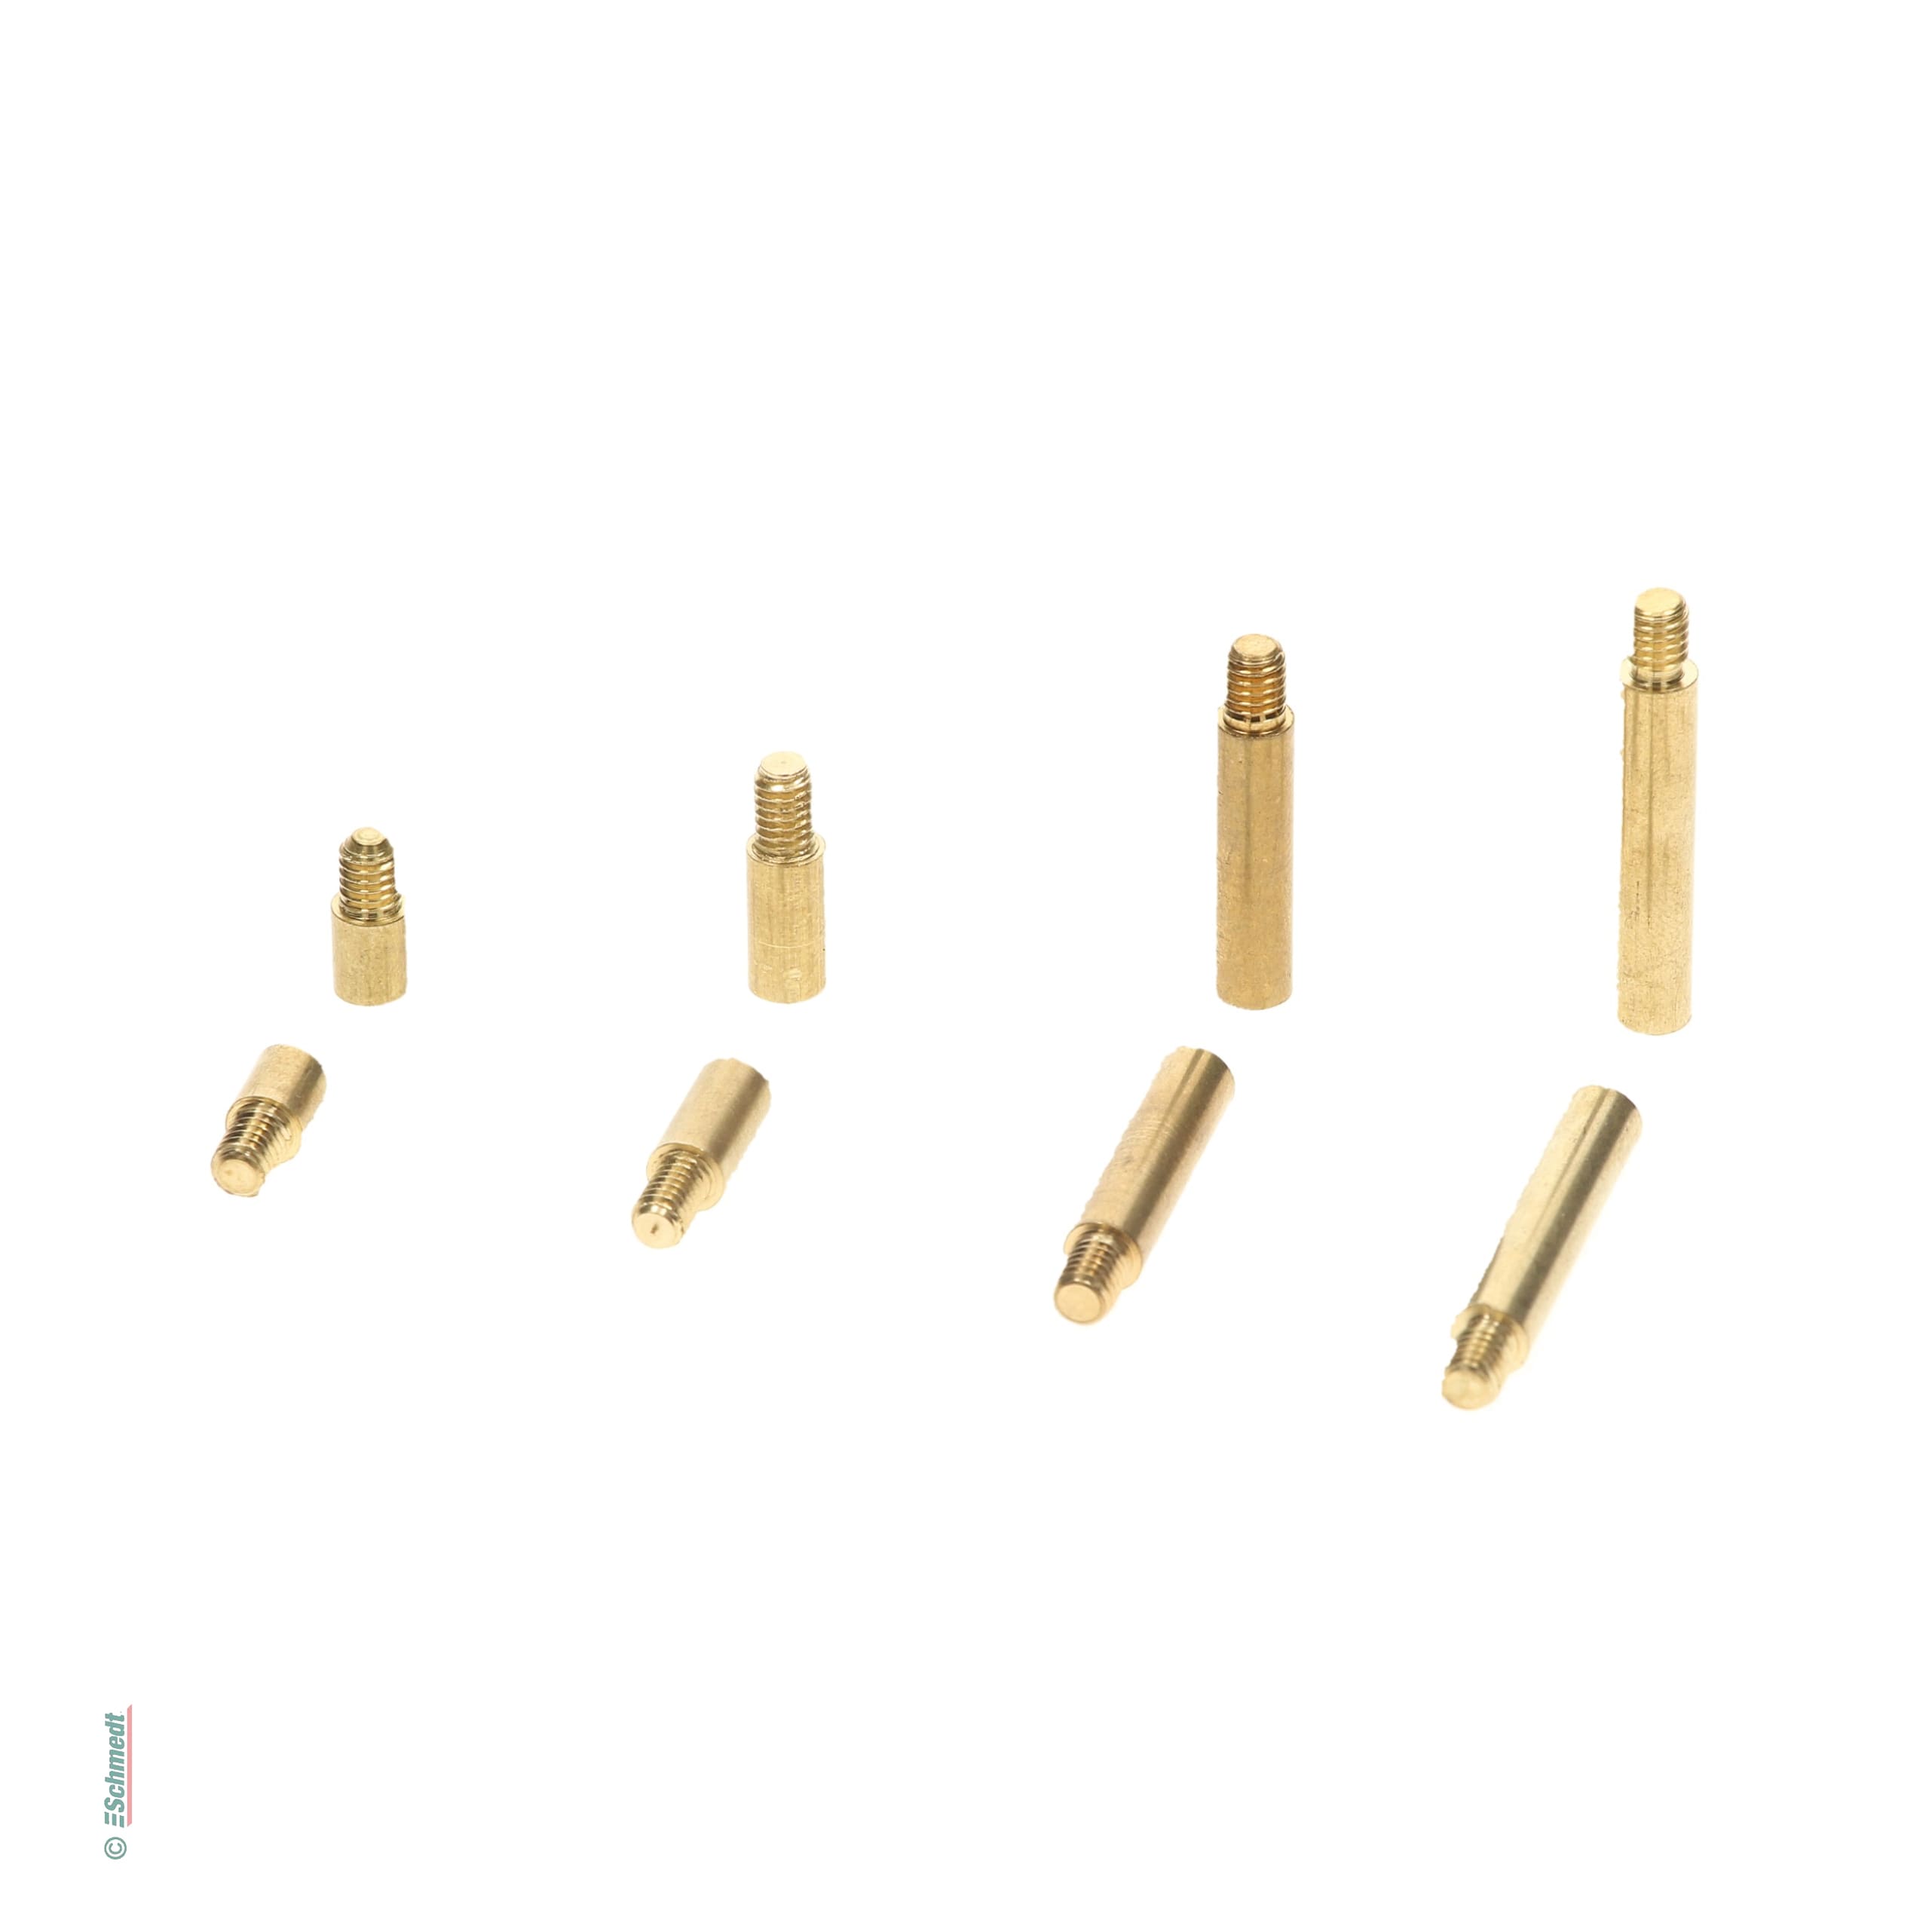 Extension for binding screws - Brass-plated metal, golden - to extend the filling height of binding scews...